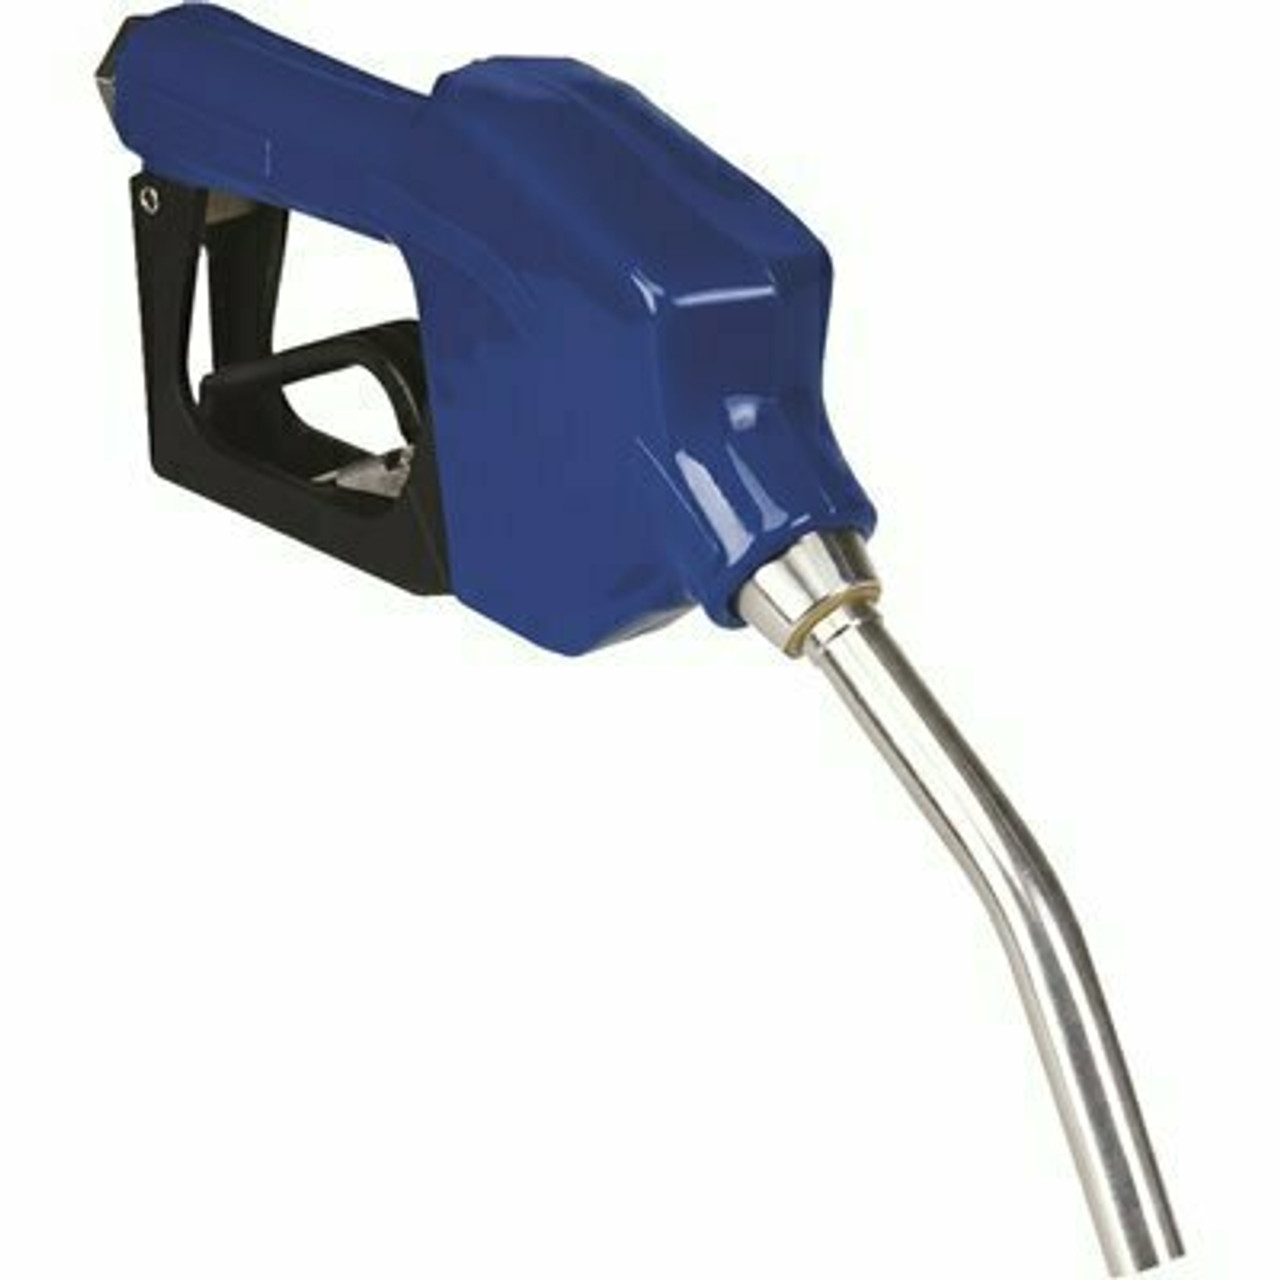 Bluedef Def Stainless Steel Automatic Nozzle